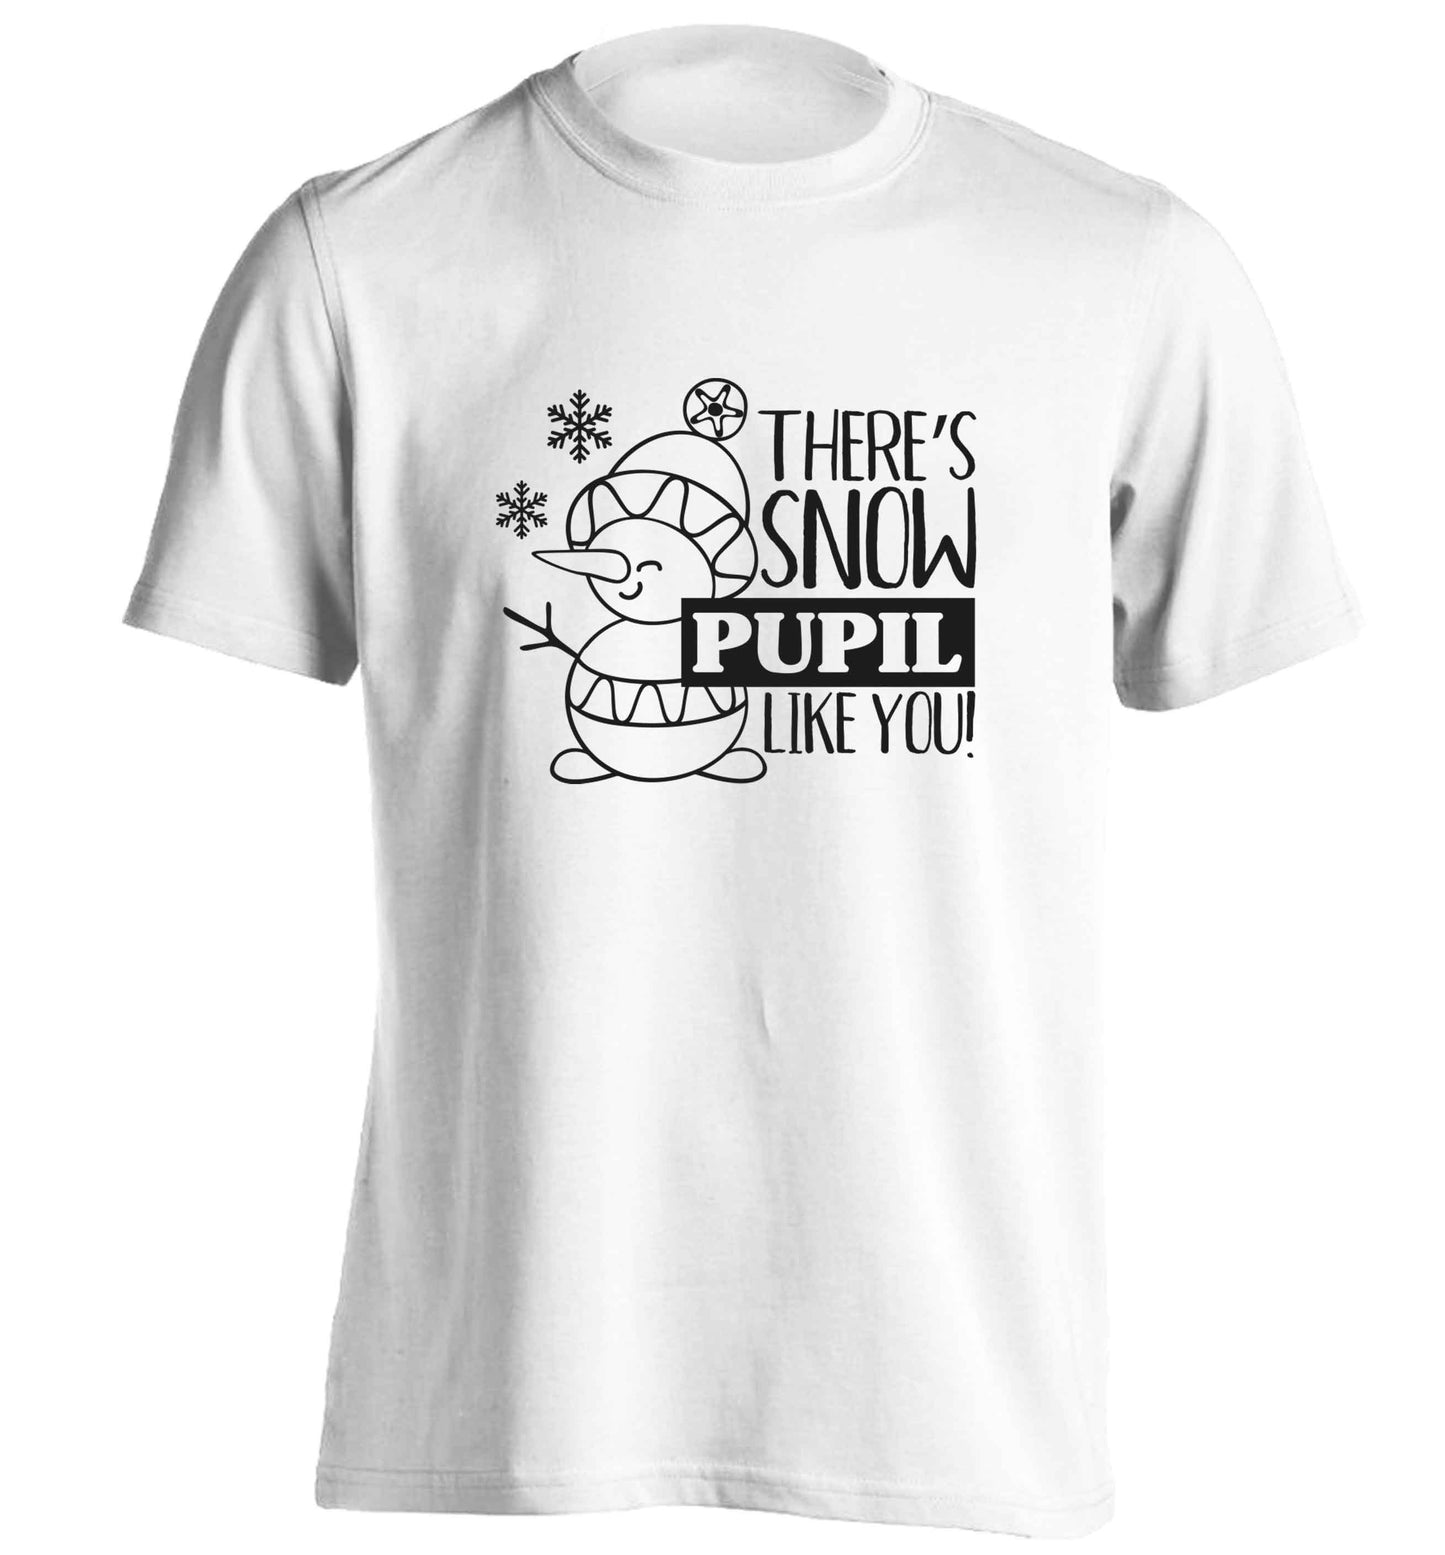 There's snow pupil like you adults unisex white Tshirt 2XL